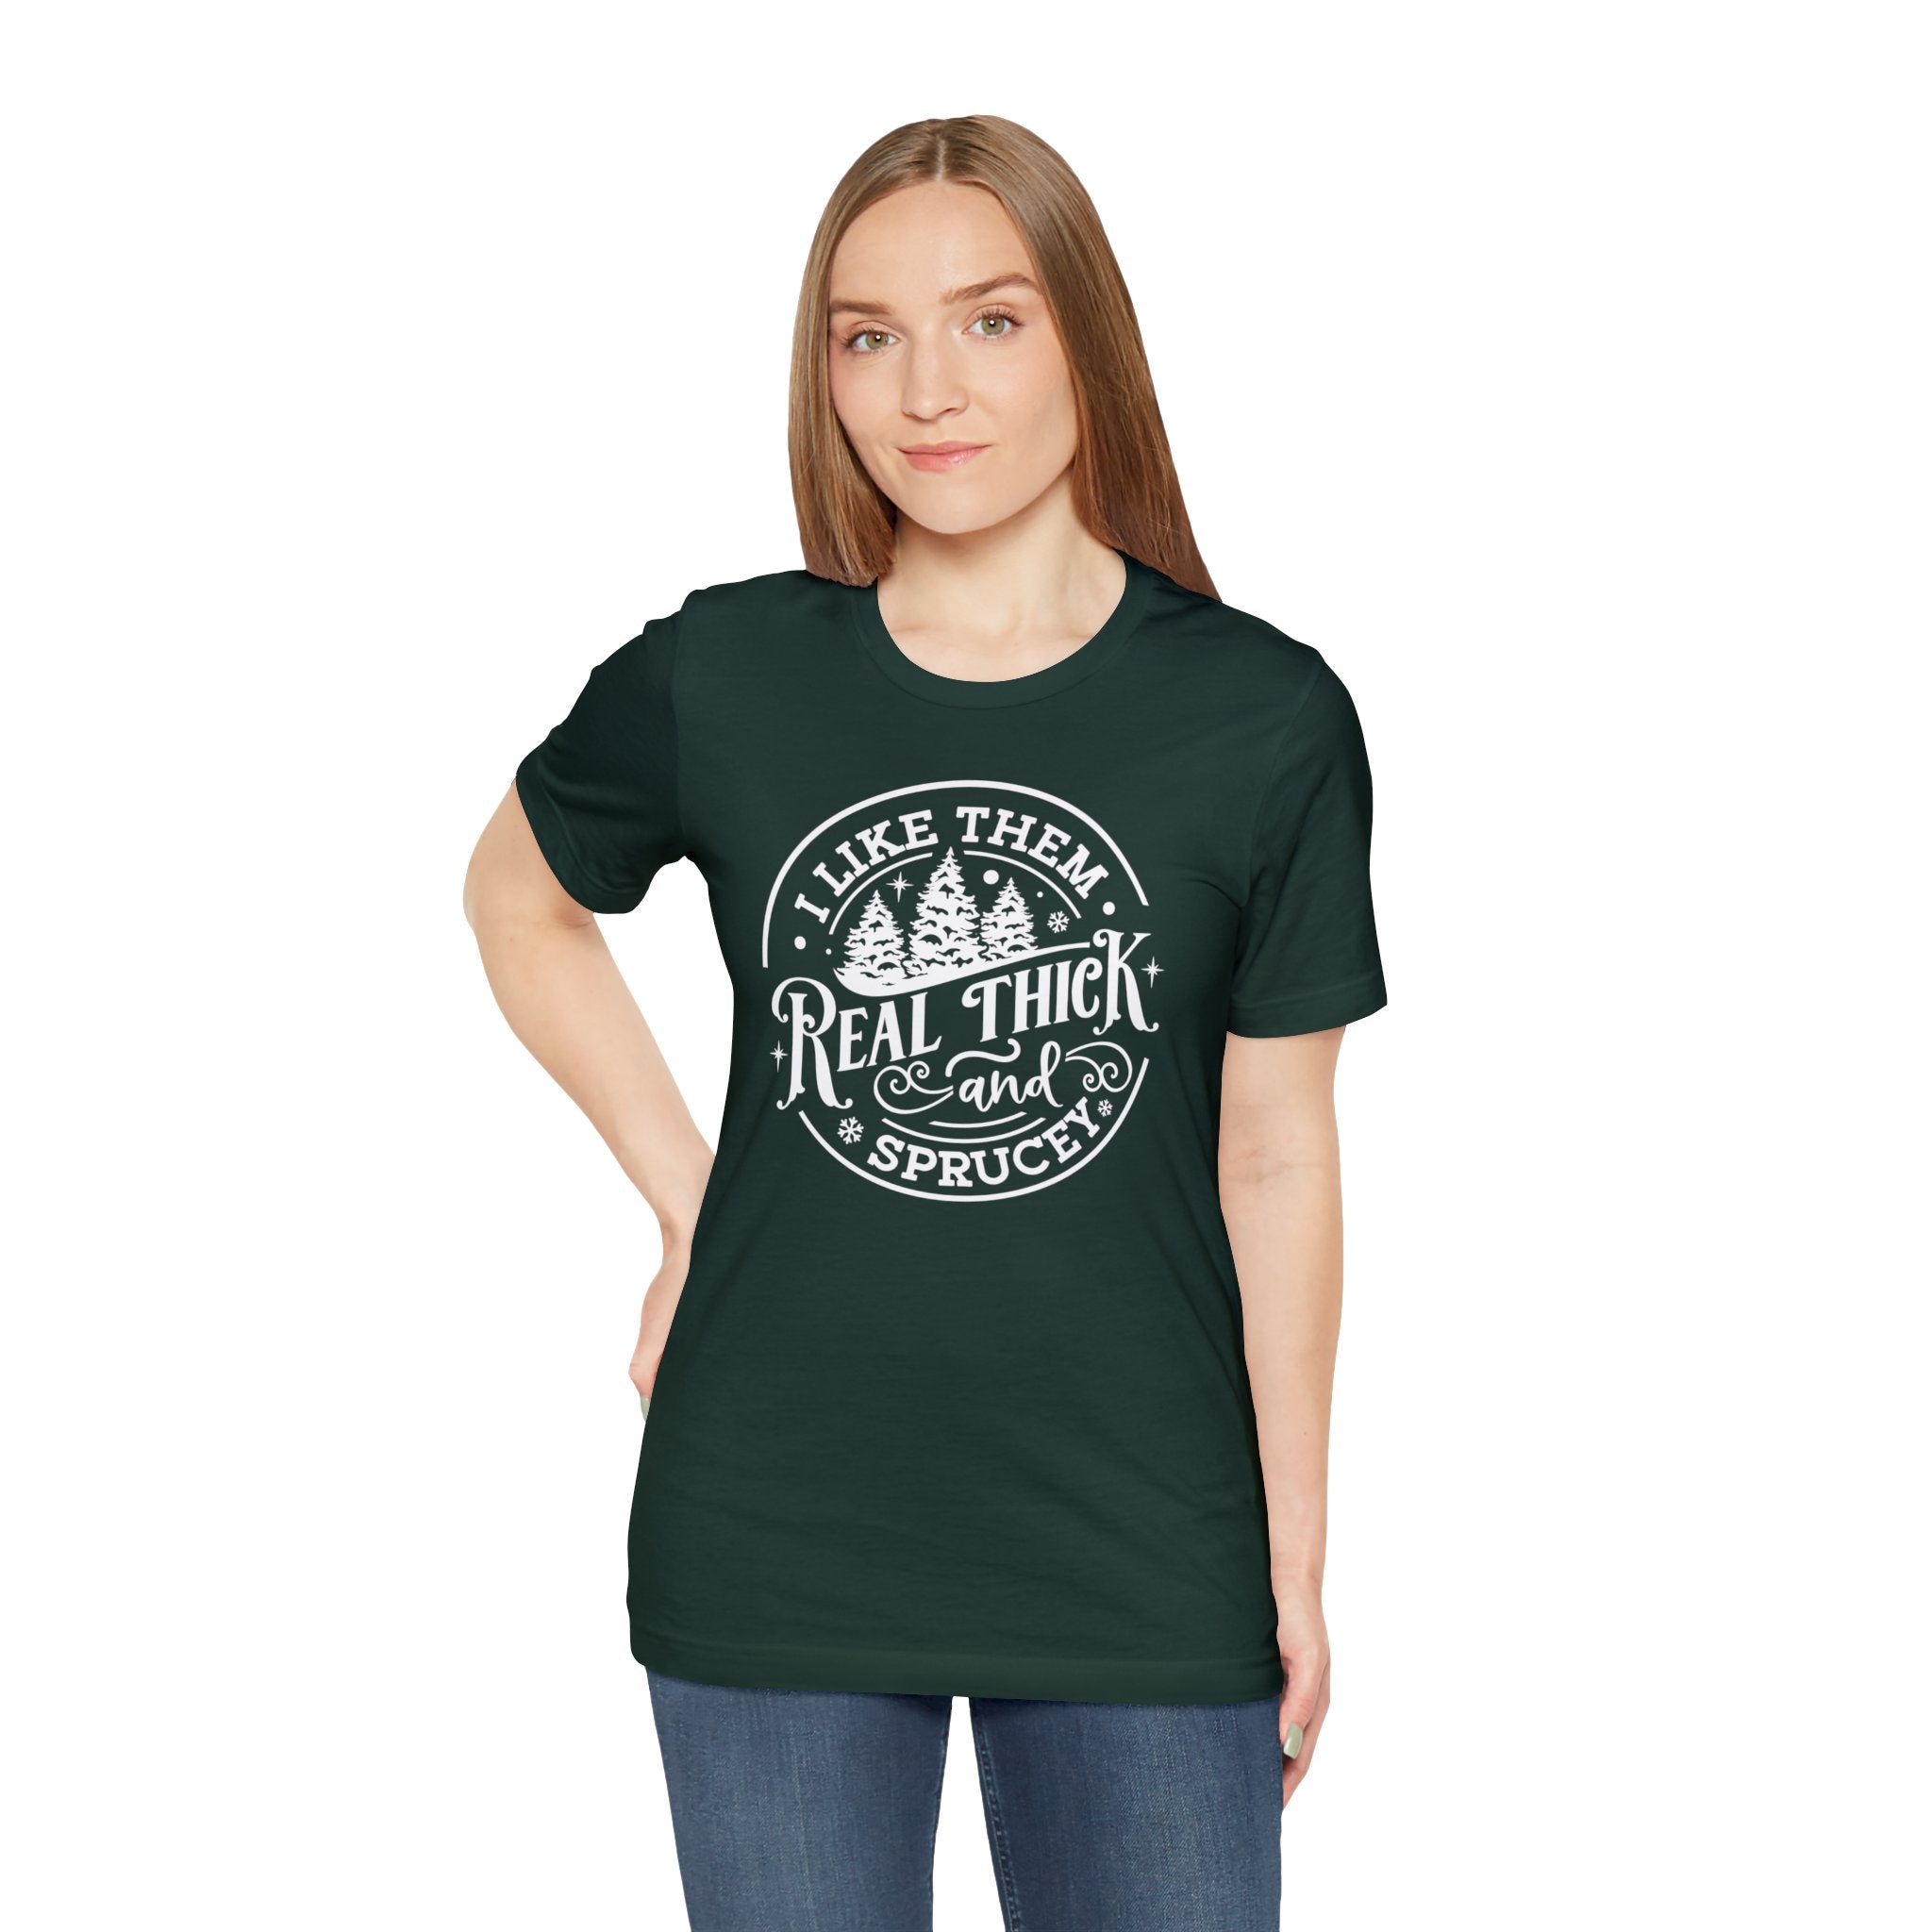 THICK AND SPRUCEY TEE - Hike Beast Store